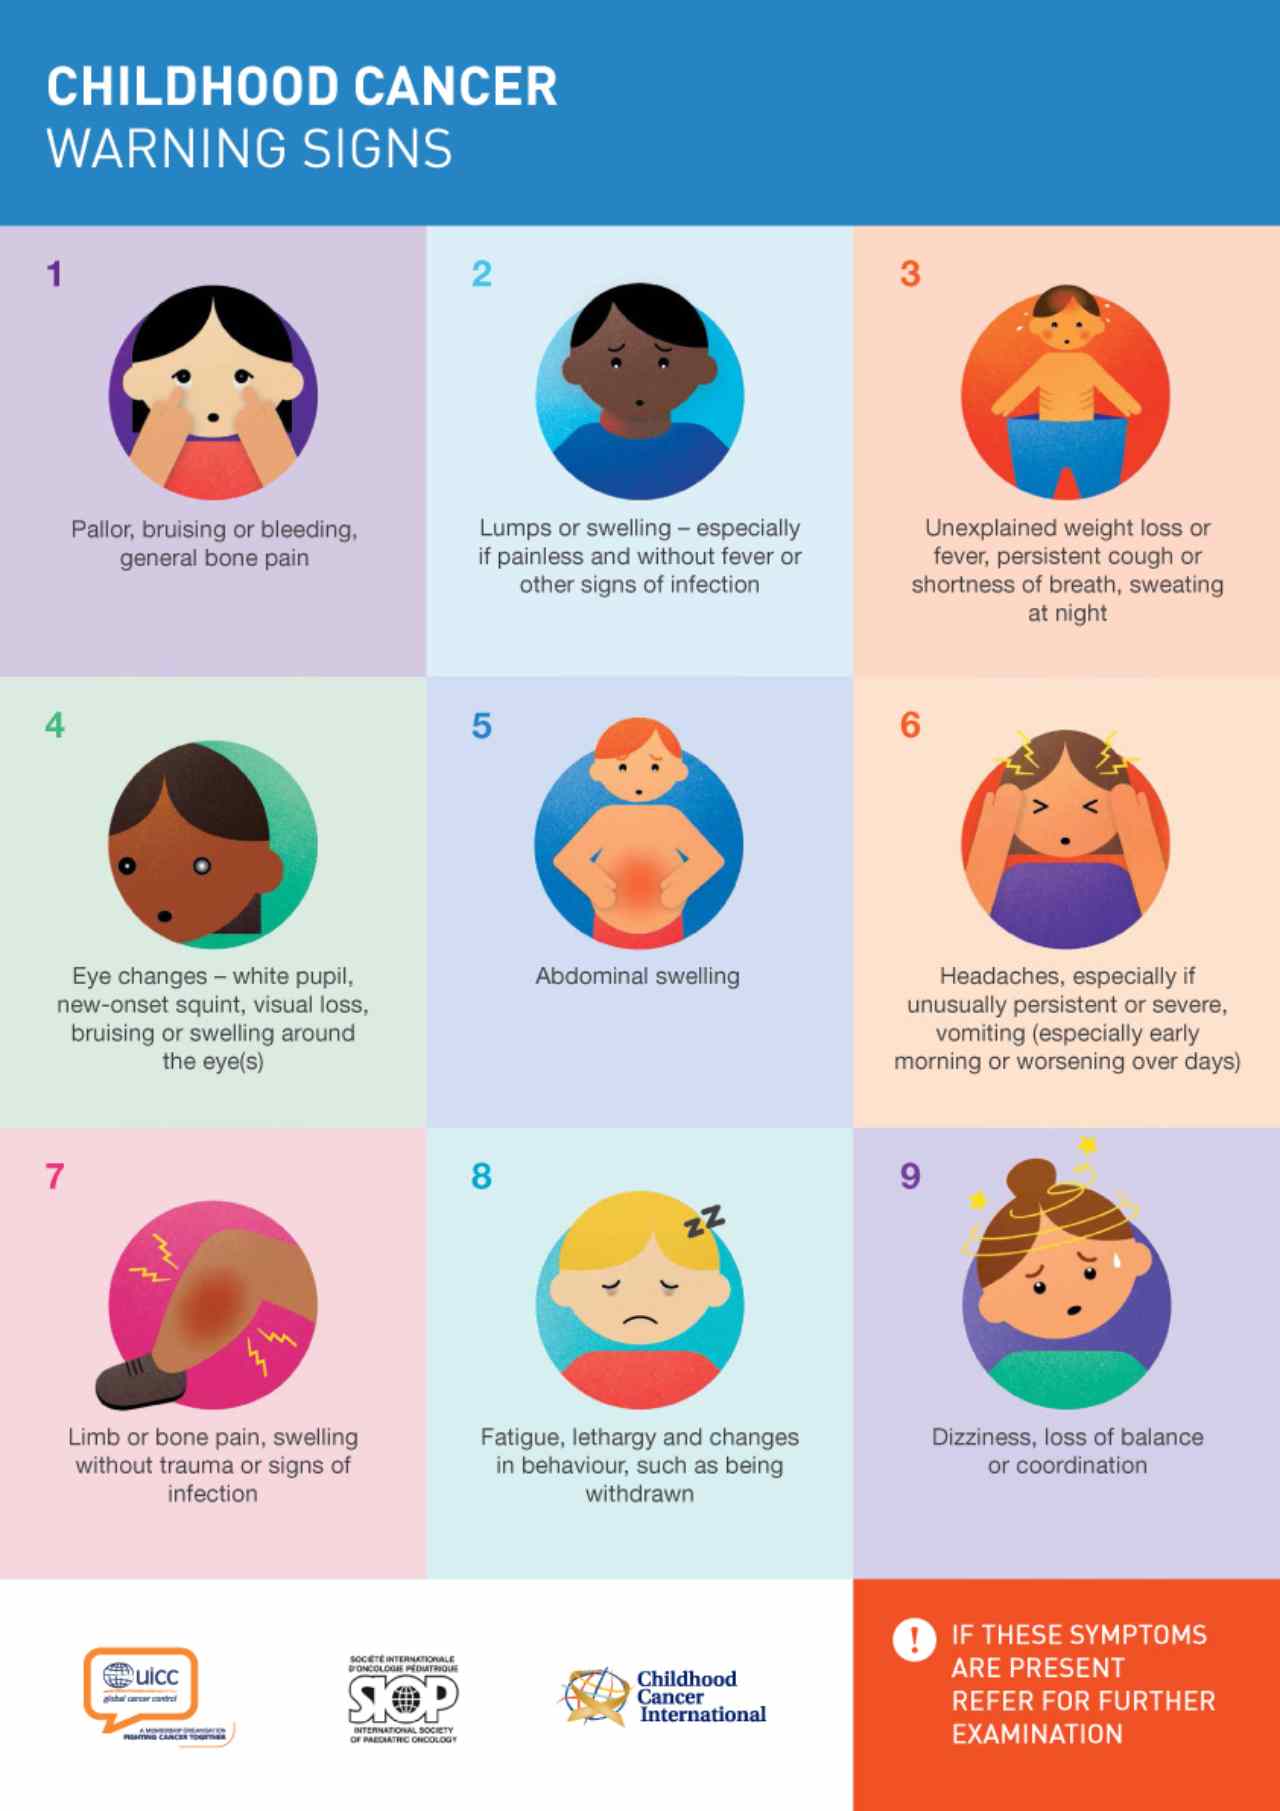 Signs and symptoms of childhood cancer to look out for. Image credit: Des Daughters